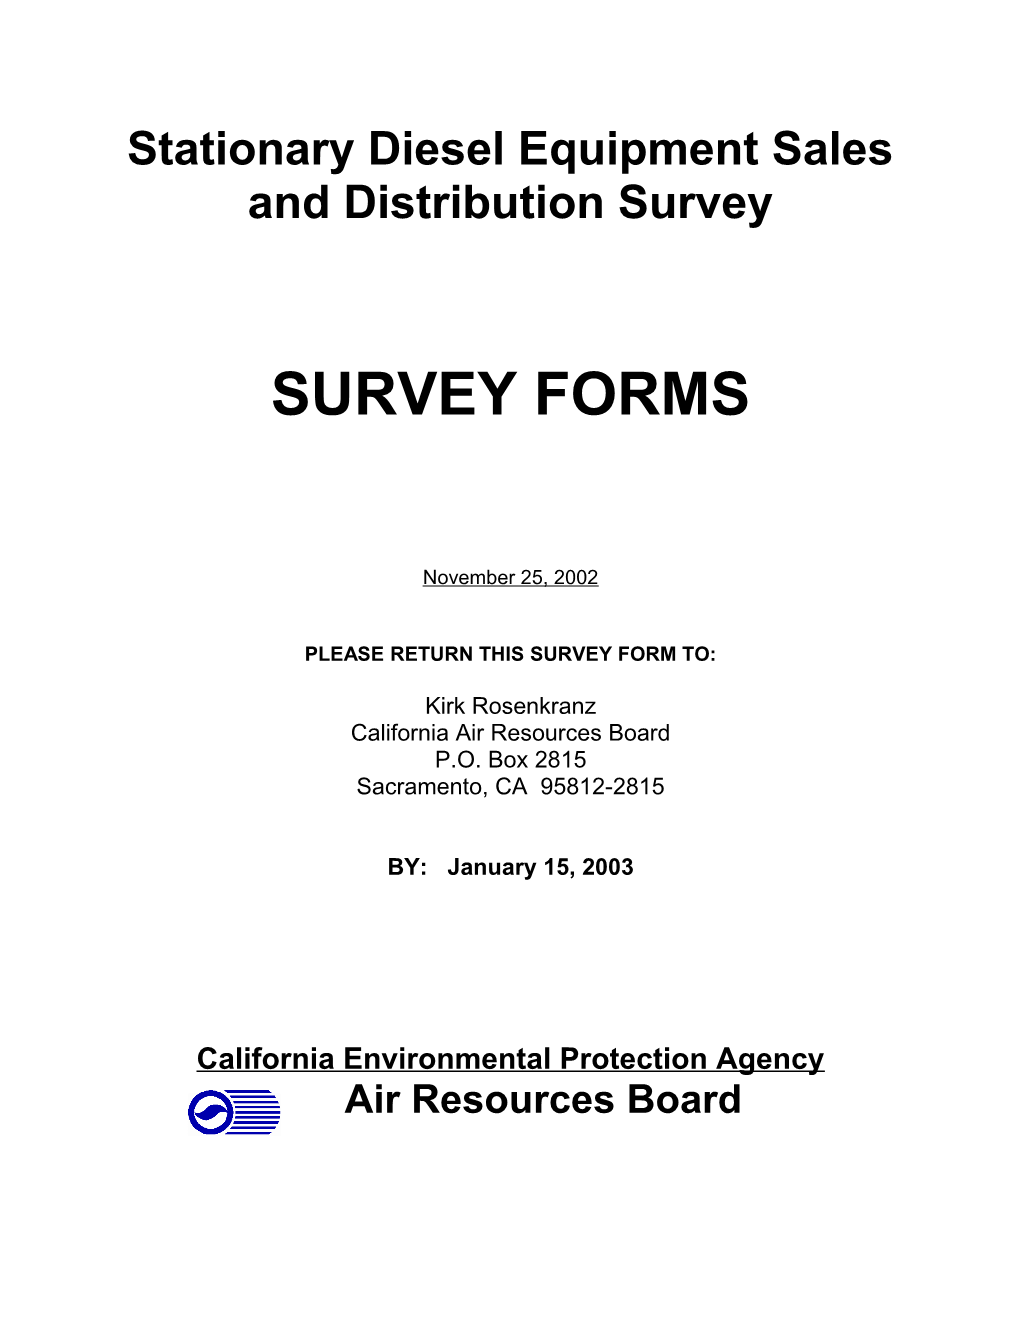 Stationary Diesel Equipment Sales and Distribution Survey